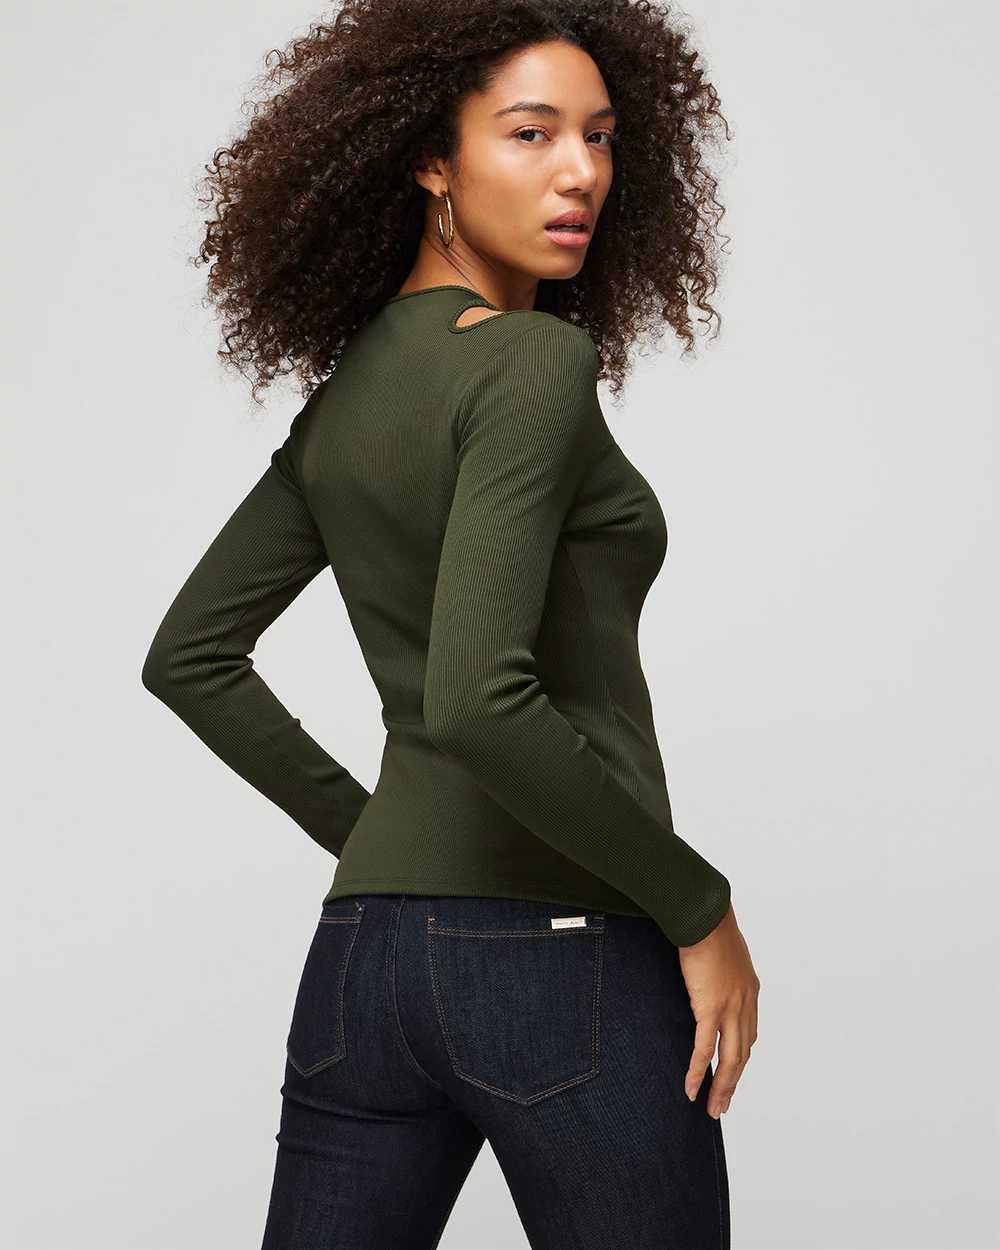 WHBM® FORME Long Sleeve Cutout Ribbed Top click to view larger image.